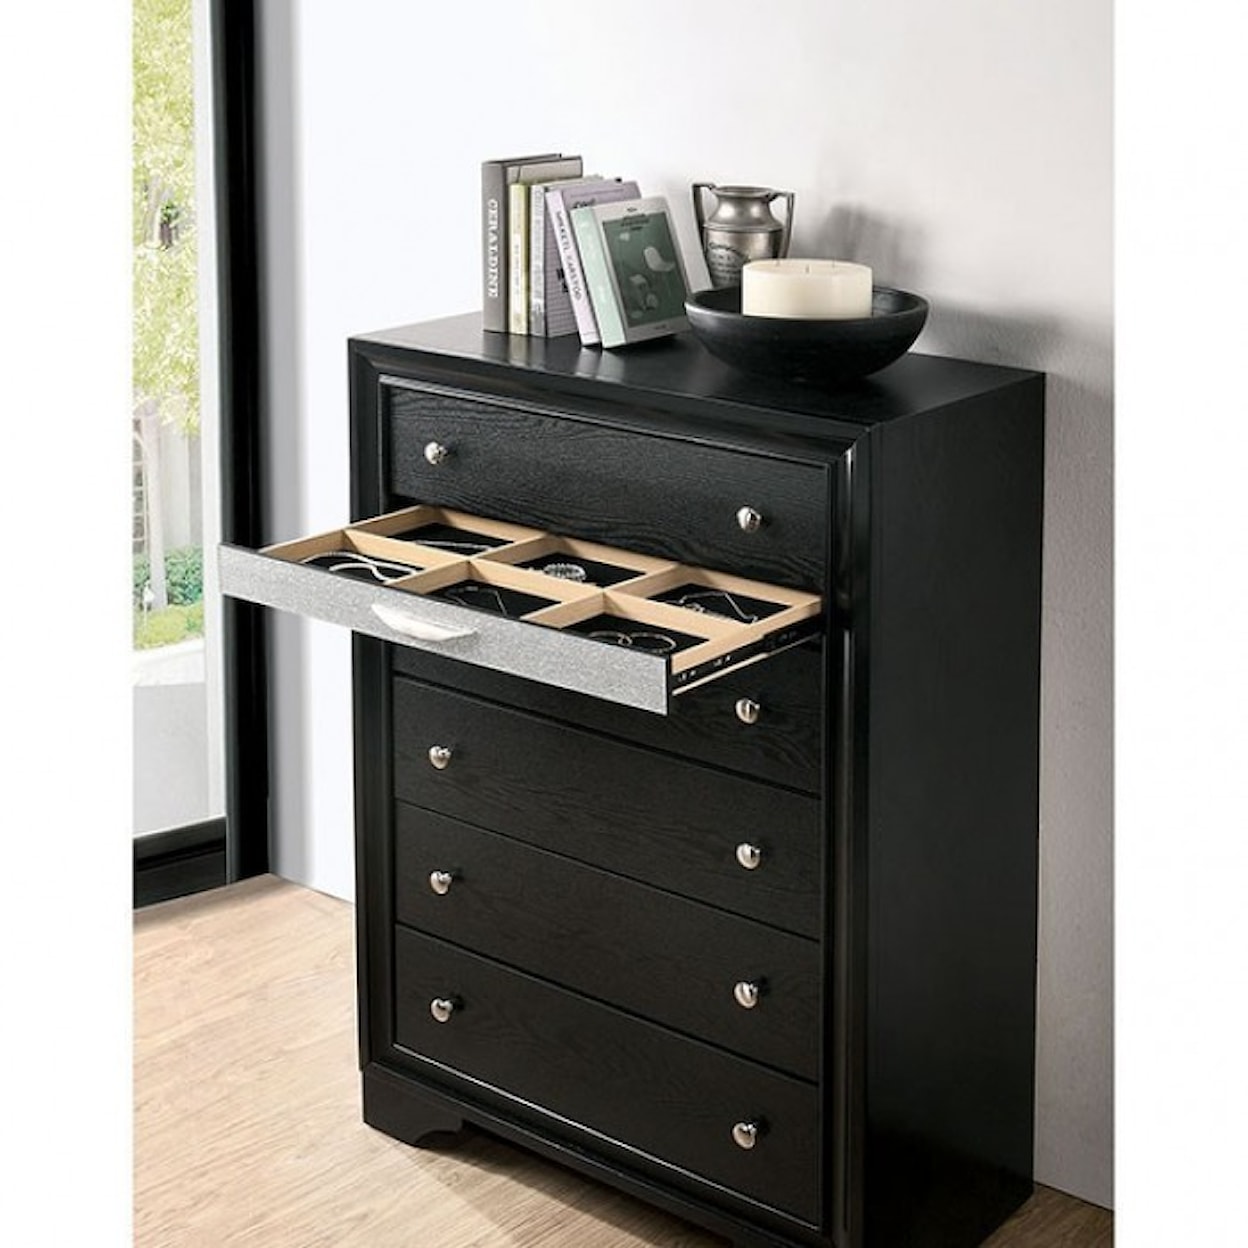 FUSA Chrissy Chest of Drawers